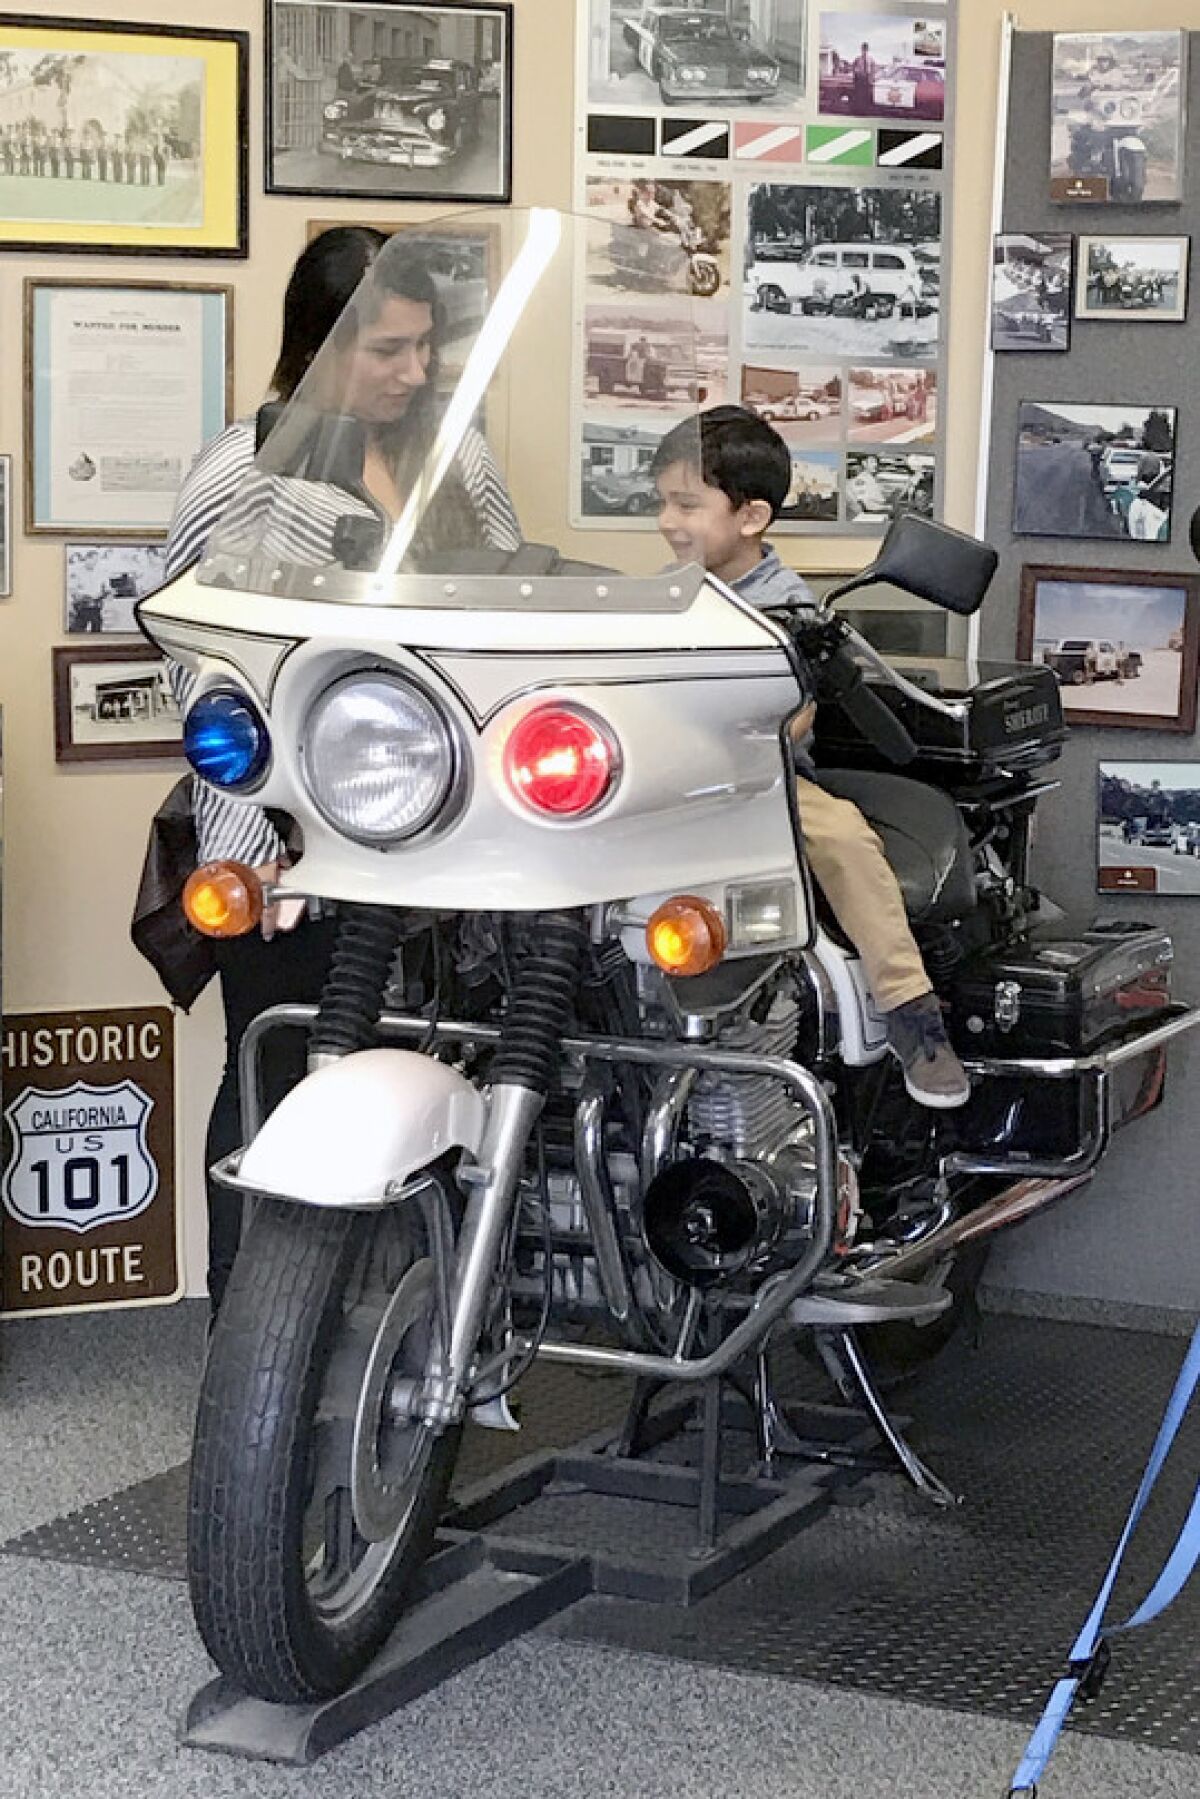 Kids can climb aboard motorcycles and let the sirens wail and lights flash at the William B. Kolender Sheriff's Museum in Old Town San Diego.